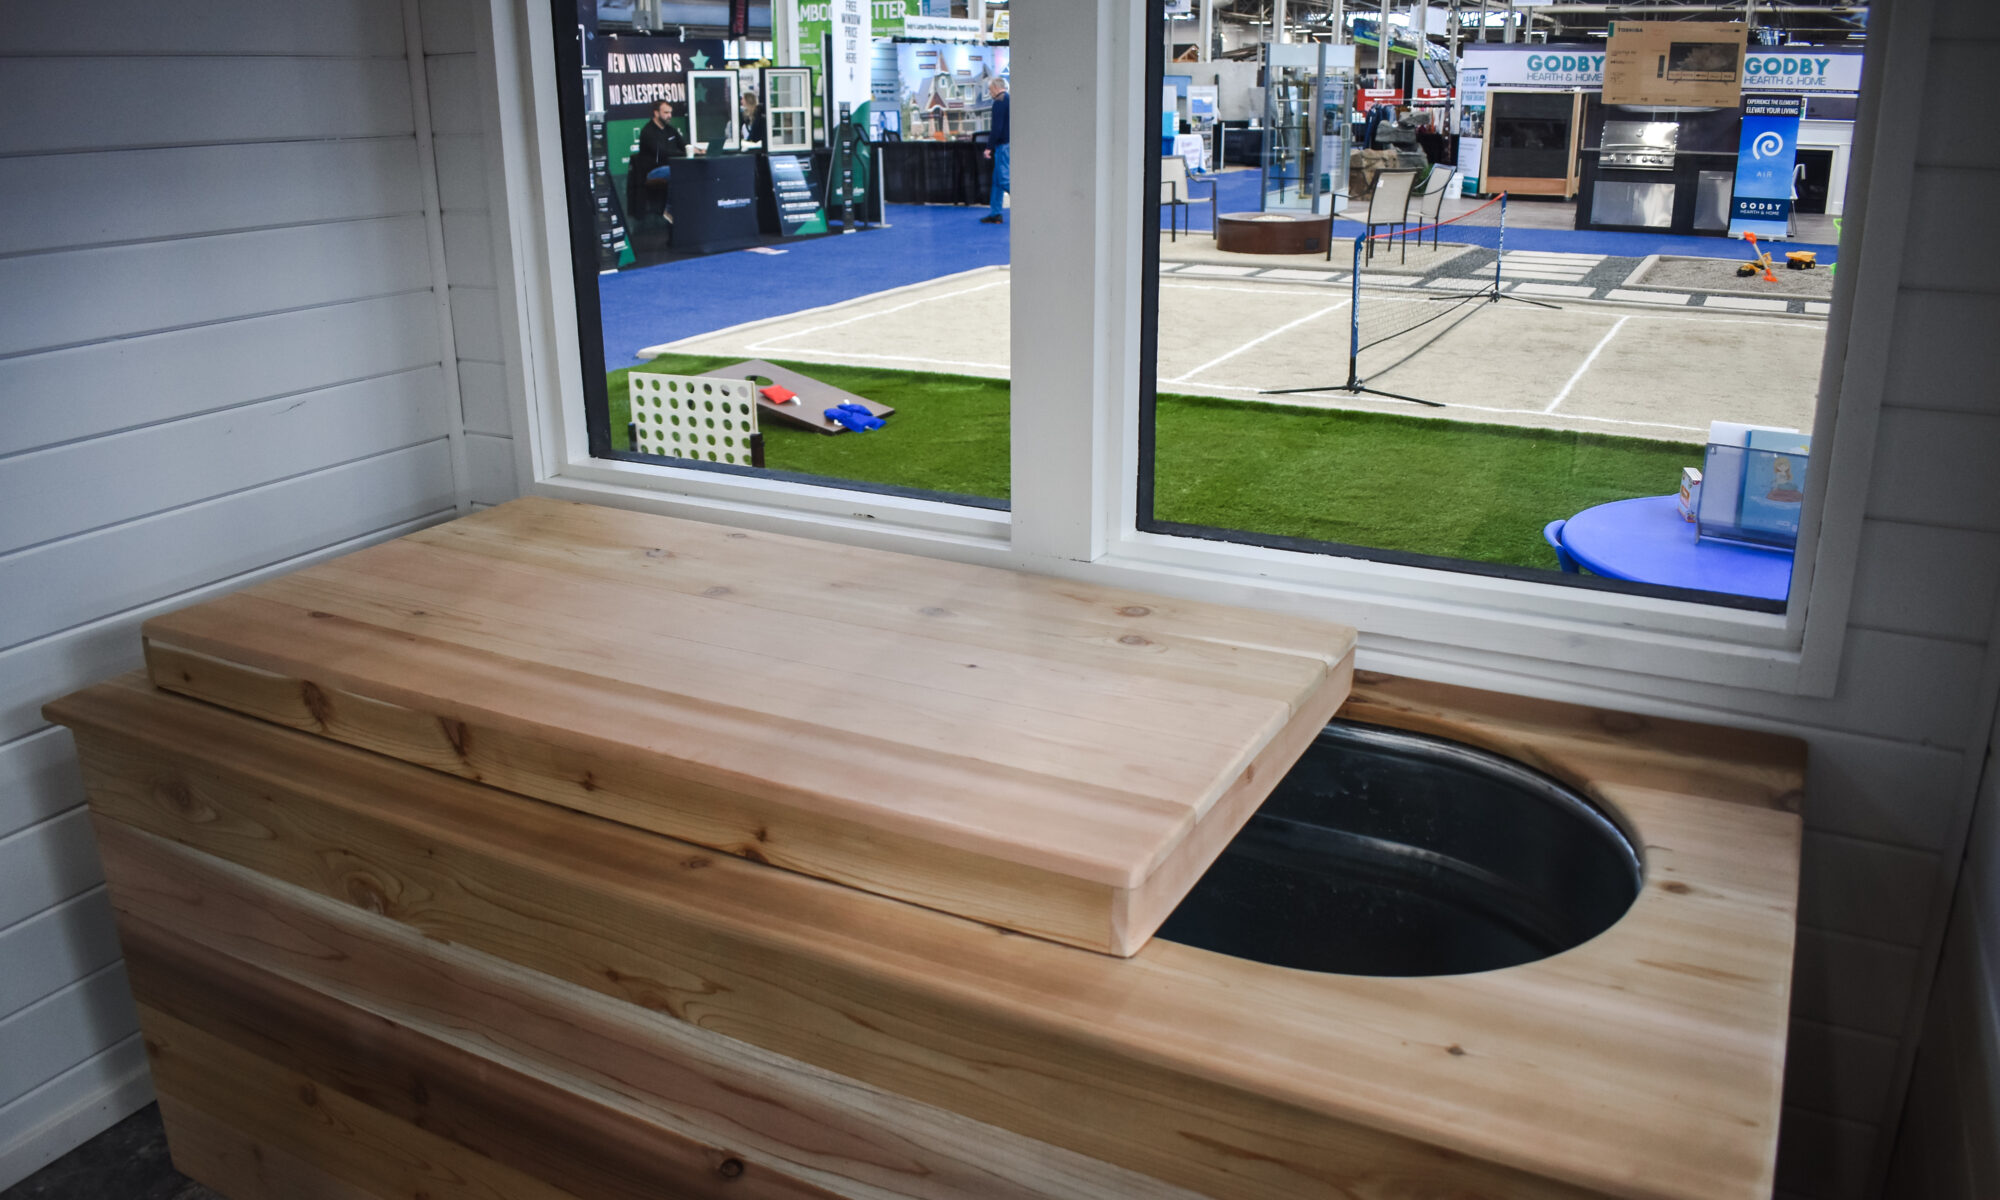 Precision Outdoors Indianapolis Indiana Home Show 2024 Living Stage HGTV Exterior Design and Build Interior Design Outdoor building Hot sauna cold plunge polar plunge belgard outdoor living products custom landscaping pickleball astroturf lawn games kids play area